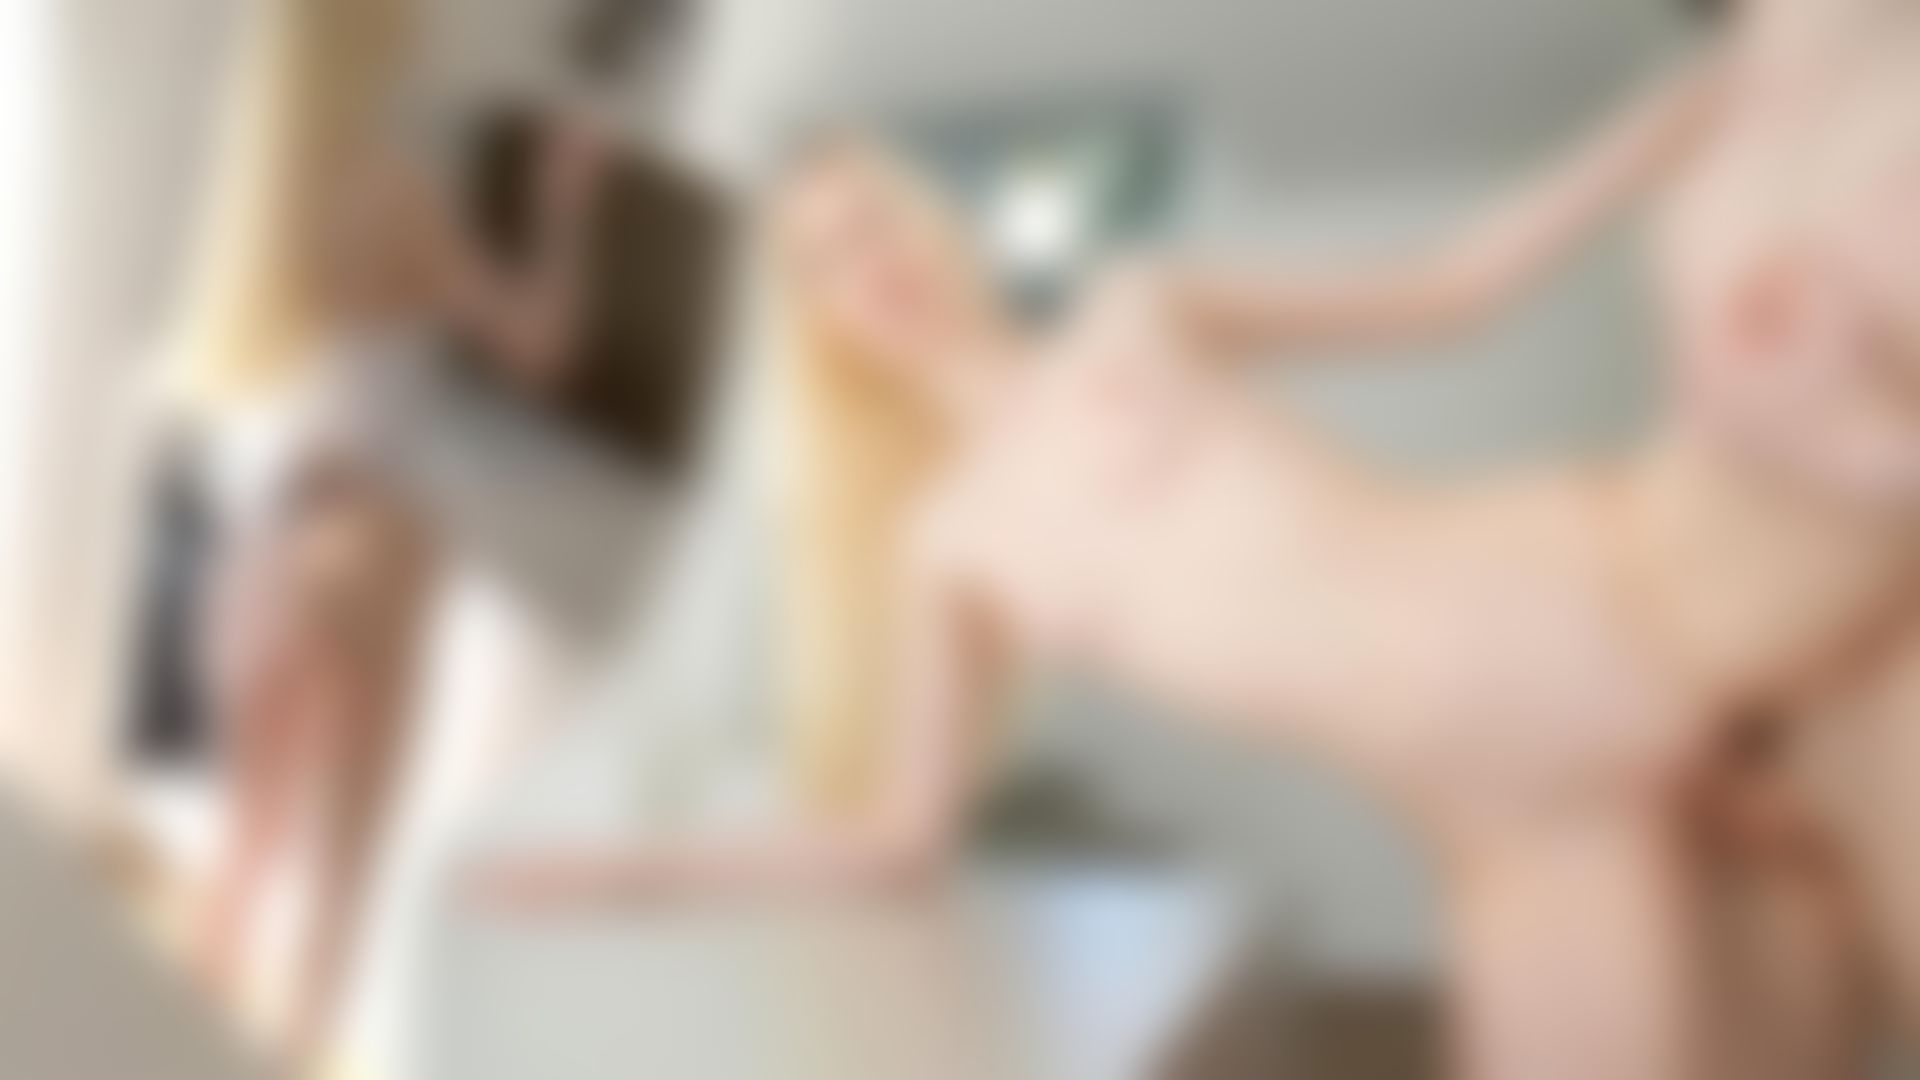 shinaryen : Usually I just have a very simple breakfast but this time I got lucky, as he suggested to have something better, which is actual a my favorite breakfast - his cock! I love sucking it in the morning and being fucked by it. The best part is to take all that cum on my face after being fucked really well #全裸 #長腿 #白虎 #騷 #大奶 #露點 #巨乳 #呻吟 #全裸 #長腿 #18 #blonde #teen #pov #amateur #bigtits #bigass #facial #sexy  